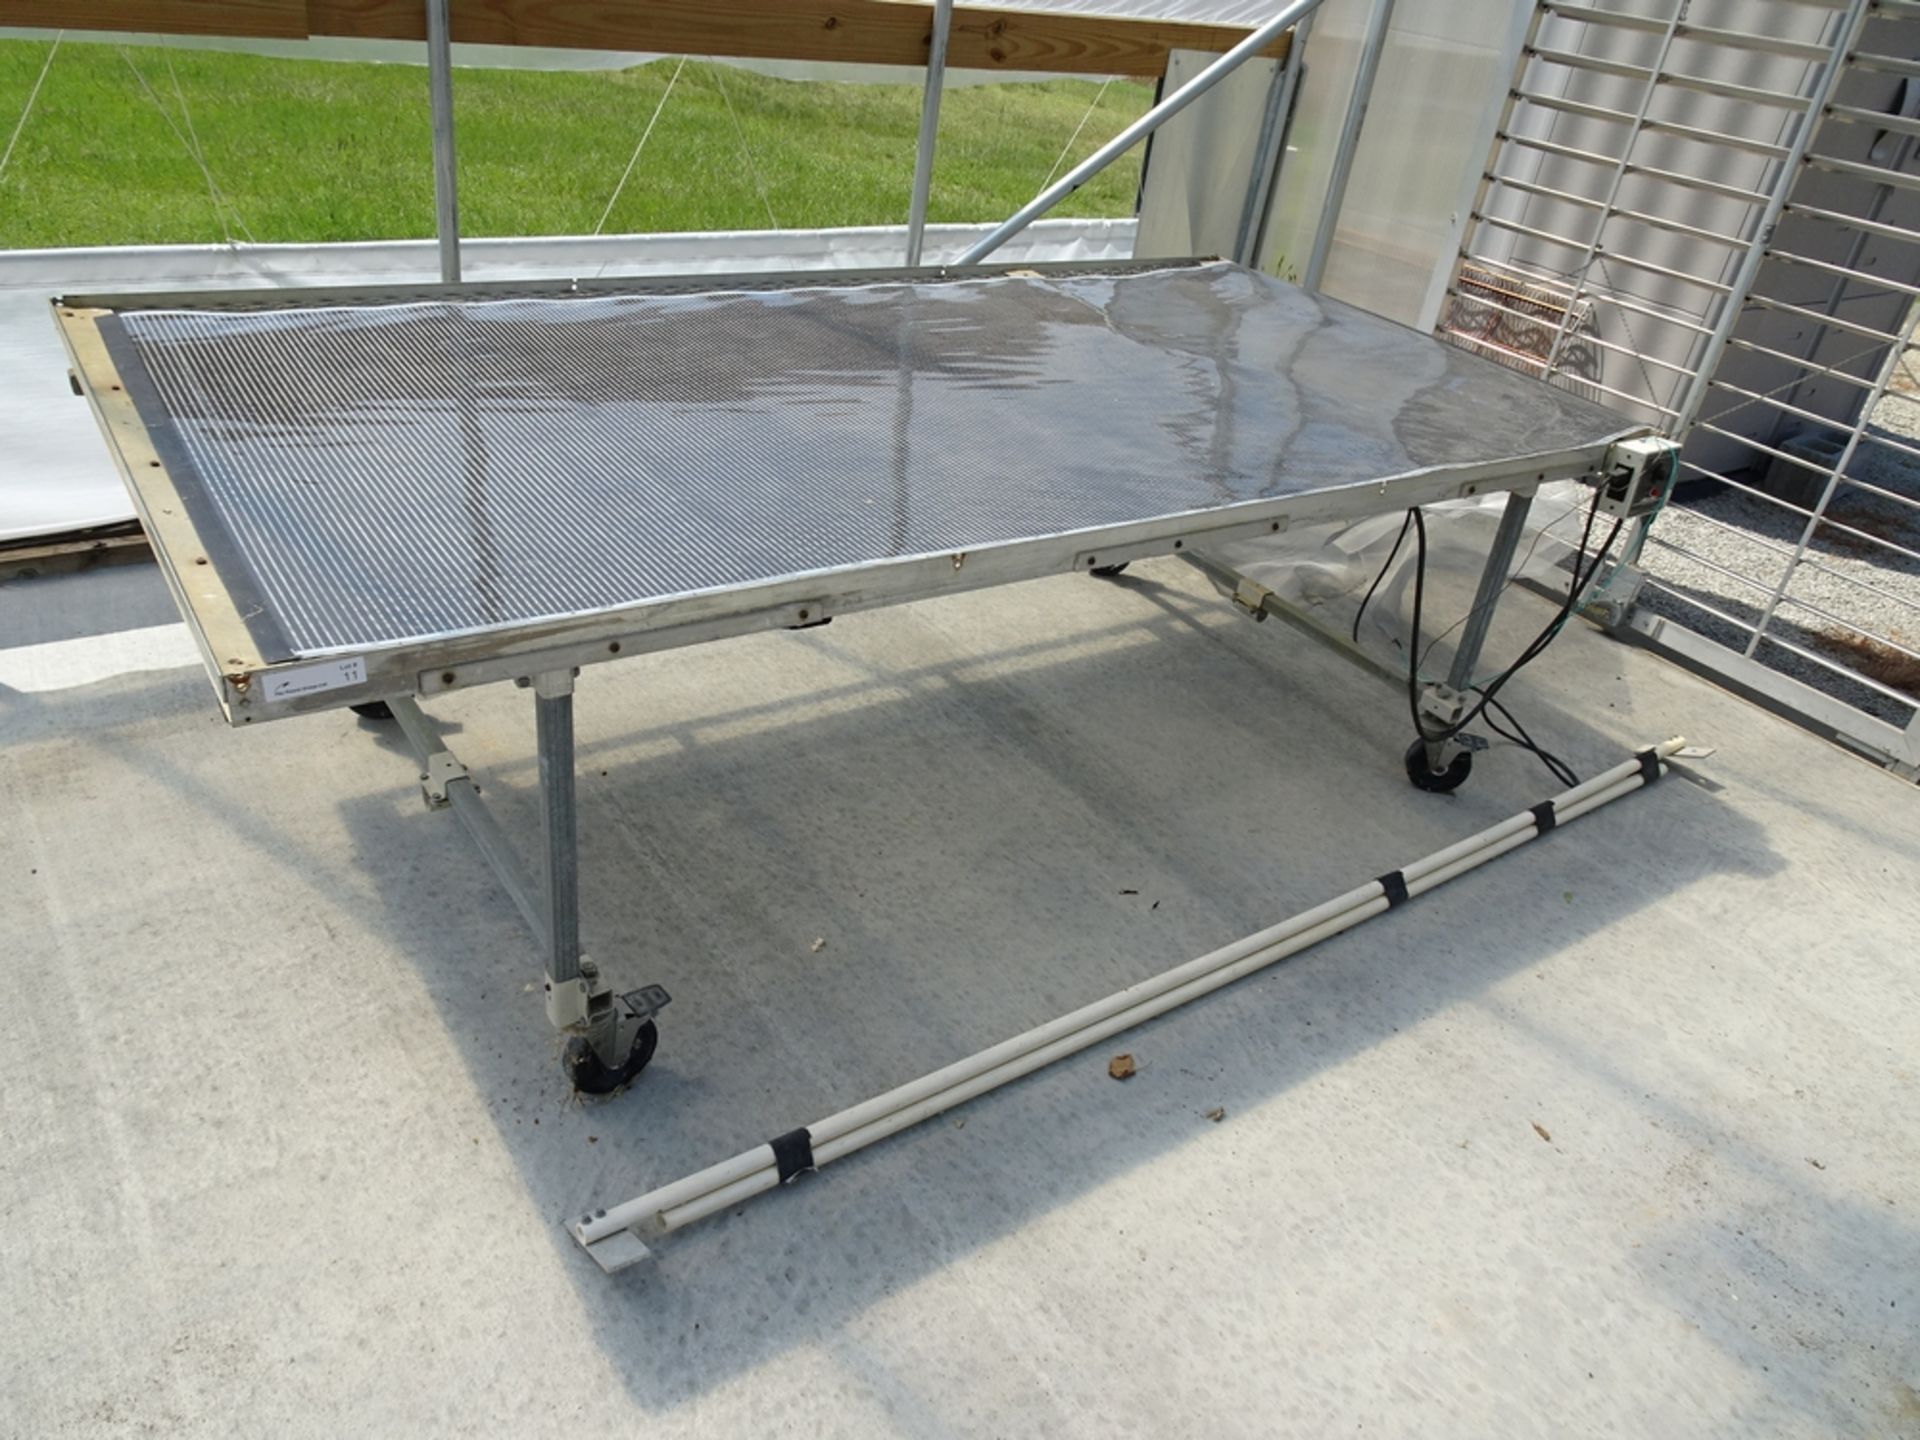 (3) Ro-Flo products 48 inch by 96 in rolling Greenhouse carts with expanded metal bases, 1 Ken-bar